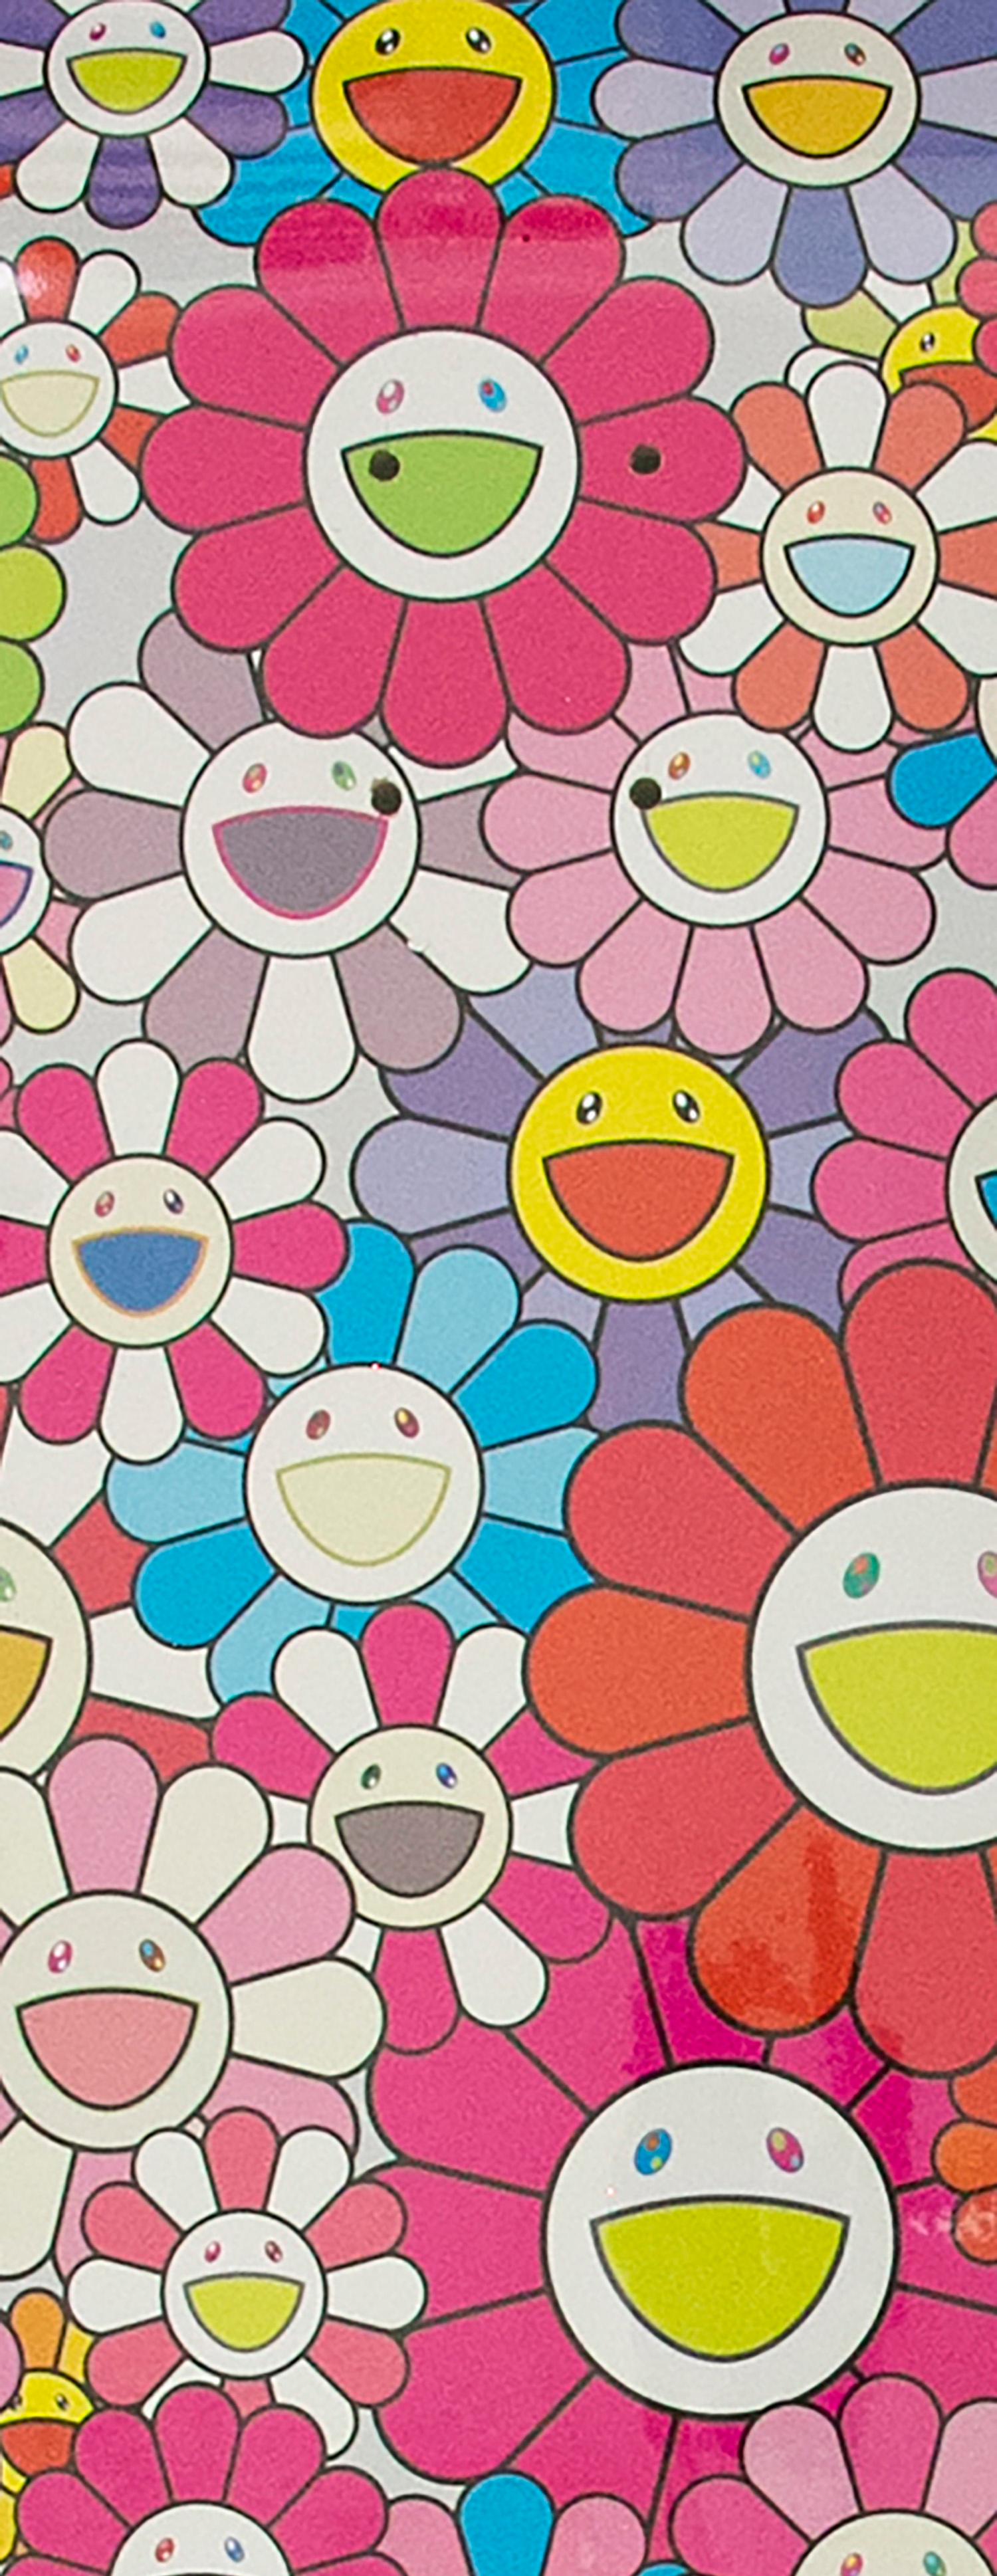 
Takashi Murakami x Complexcon Deck 8.0 - Pink Multi Flower - 2017.

Takashi Murakami (Japanese, b. 1962) is internationally renowned for his playful negotiation of several styles and traditions. Combining the 19th-century Japanese painting style